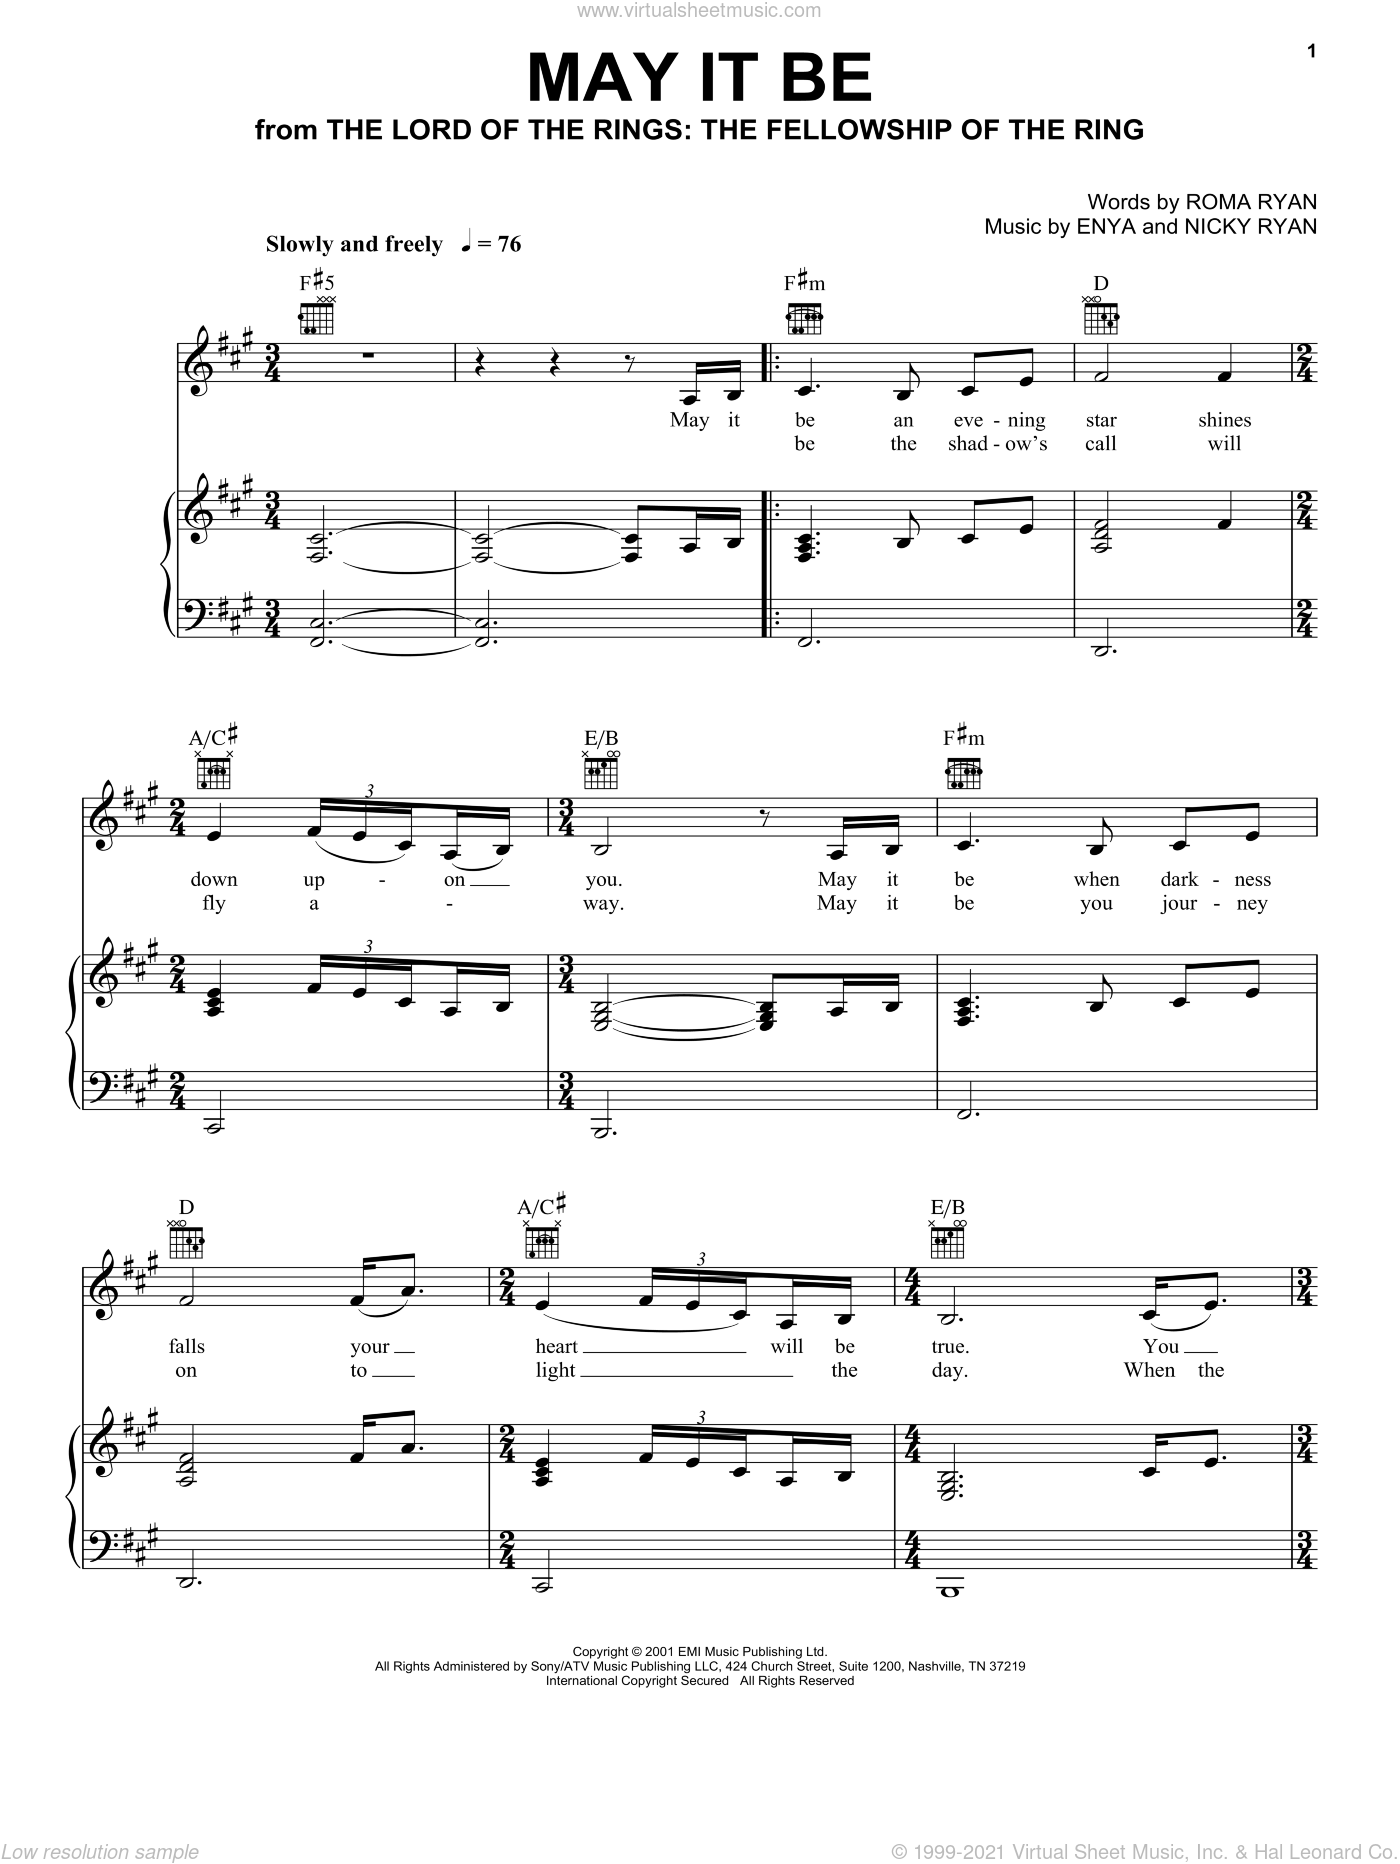 energi Ekstrem fattigdom position May It Be (from Lord Of The Rings: The Fellowship Of The Ring) sheet music  for voice, piano or guitar